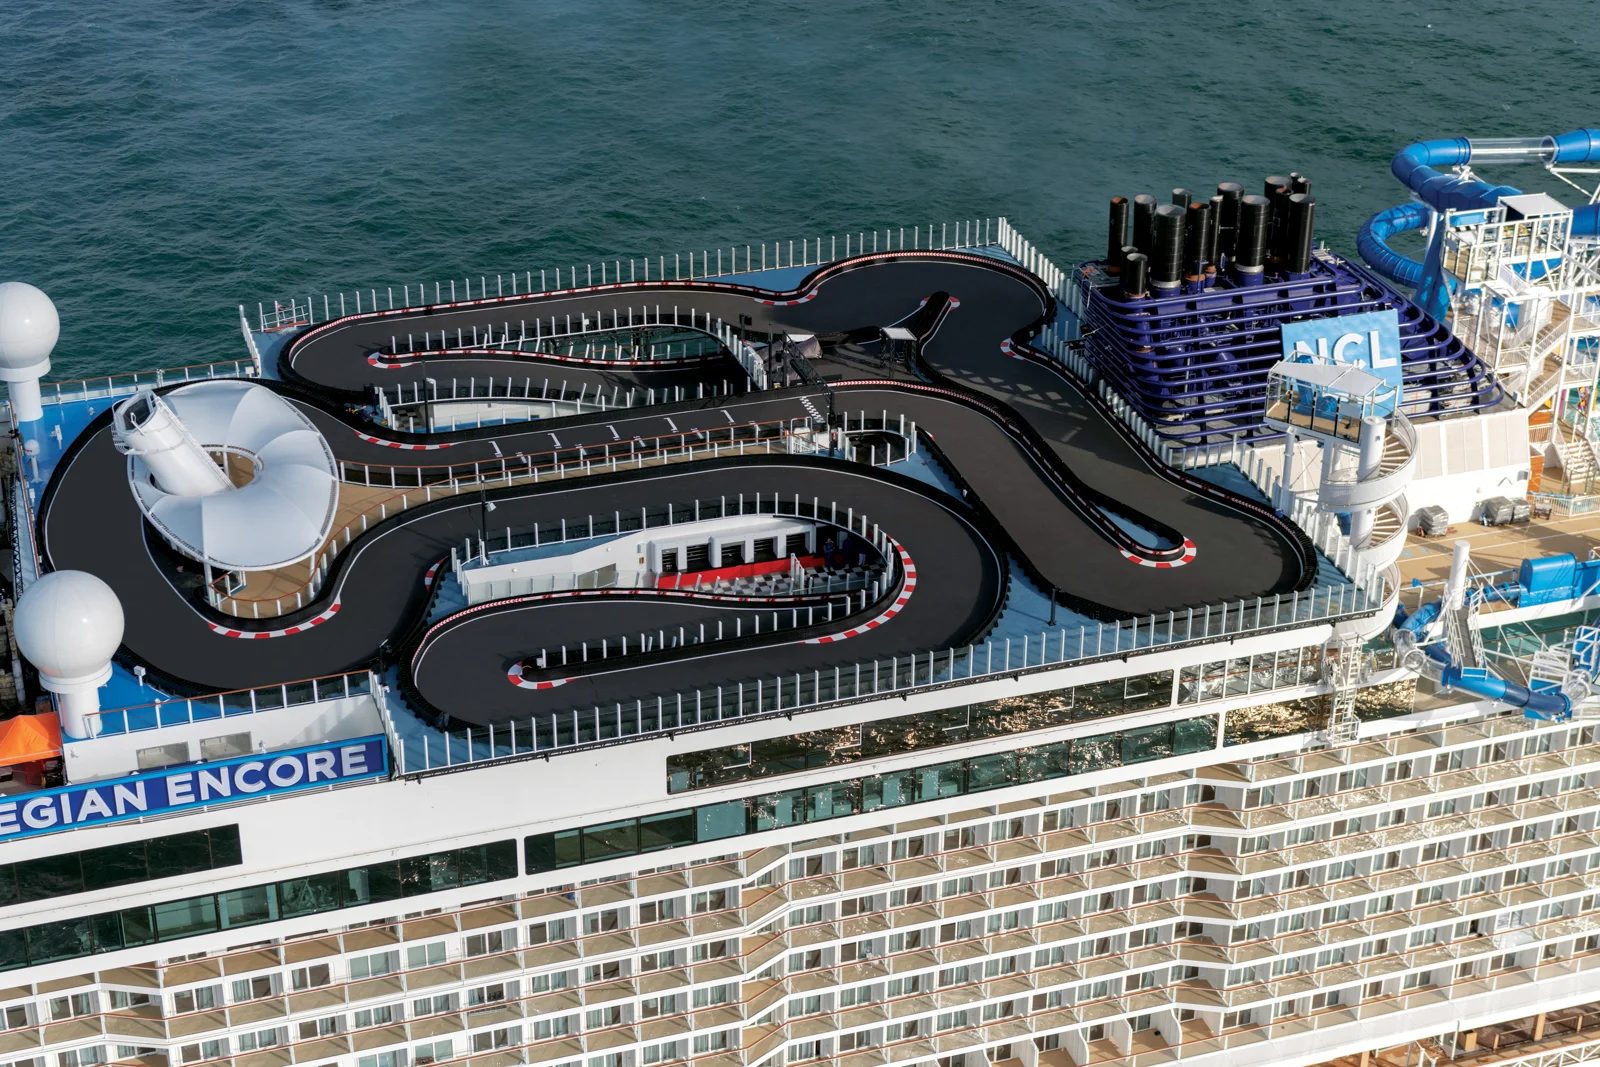 These are the ten most extreme attractions that may be found on a cruise ship.